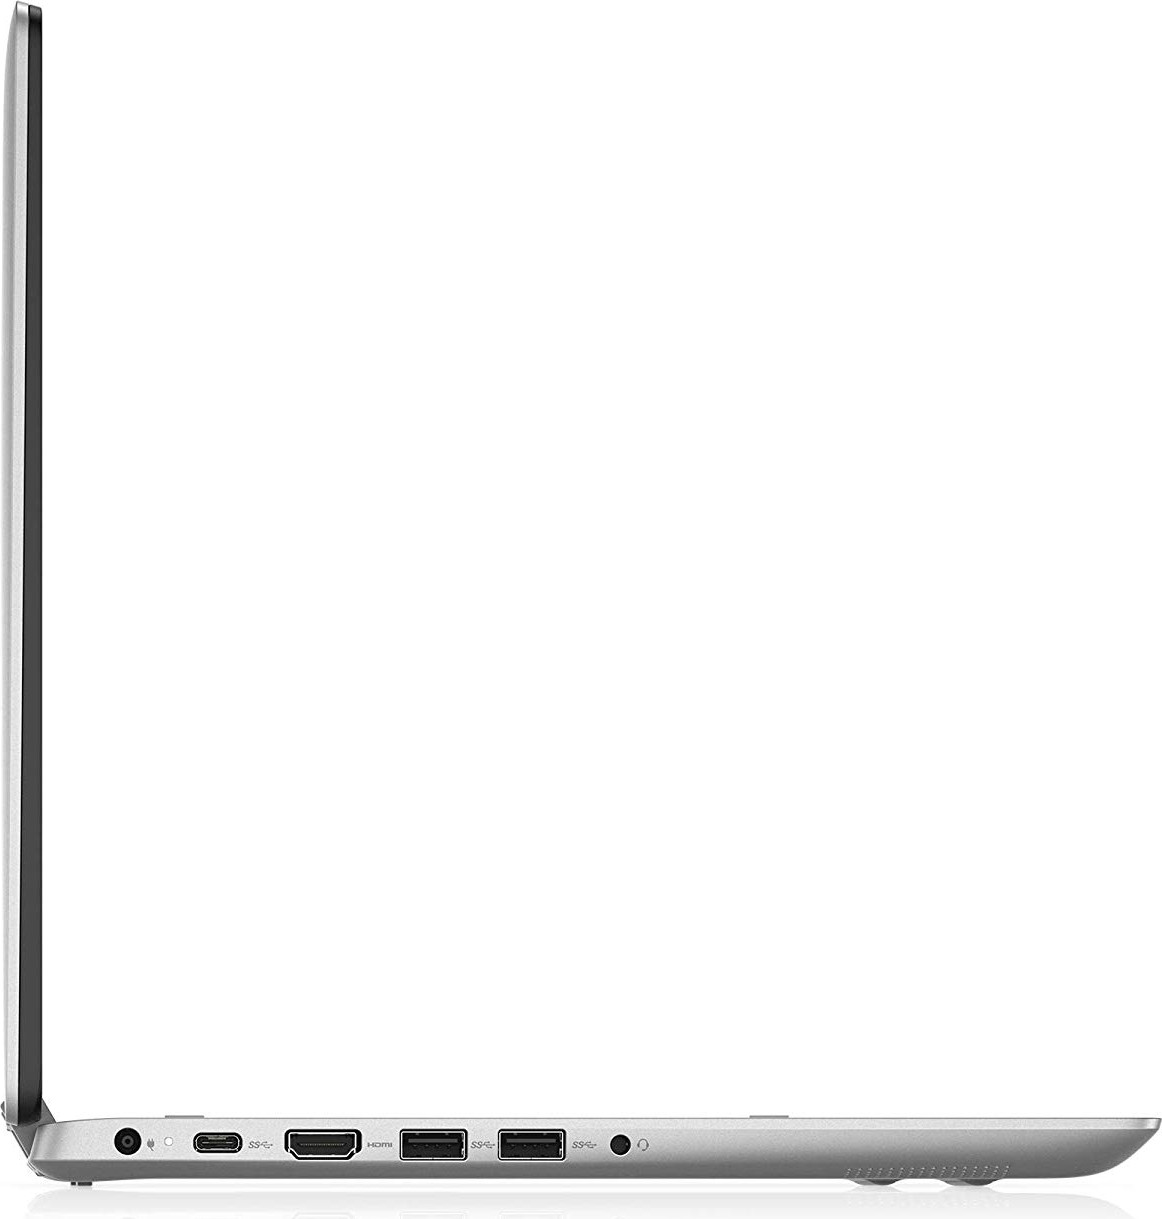 Dell Inspiron 2-in-1 Laptop LED-Backlit Touch Display, i7-8565U, 8GB 2666MHz DDR4, 256 GB m.2 PCIe SSD, 14", Silver, Alexa Built-In (i5482-7069SLV-PUS)